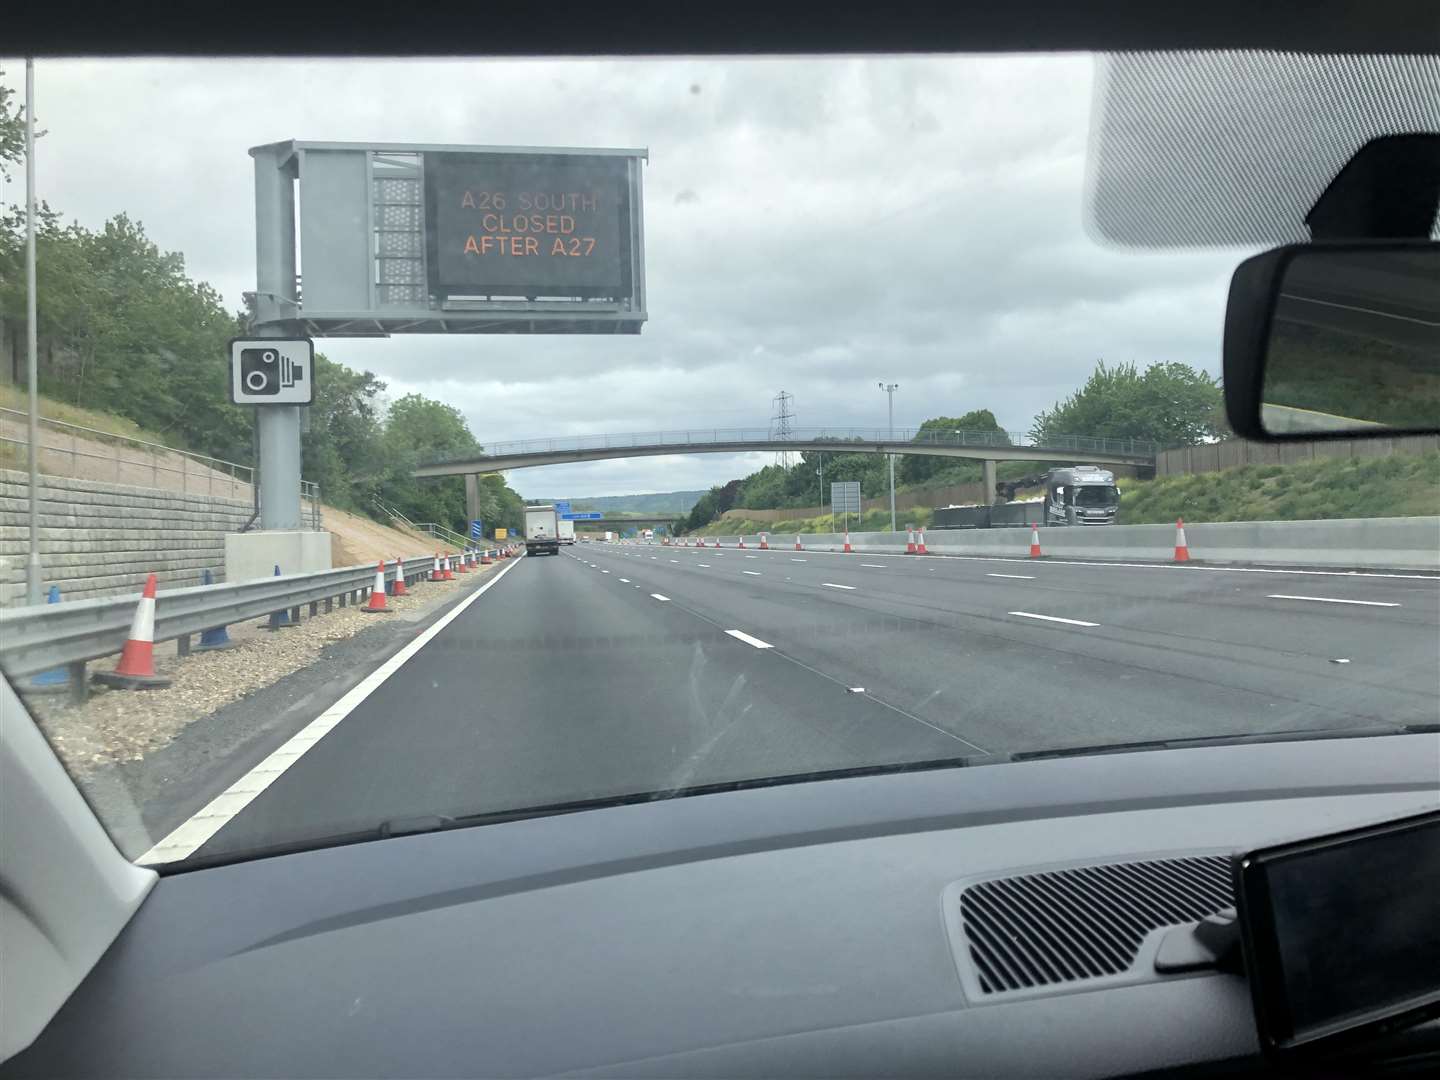 A passenger's view of the inside lane on the M20 after it was converted into a smart motorway